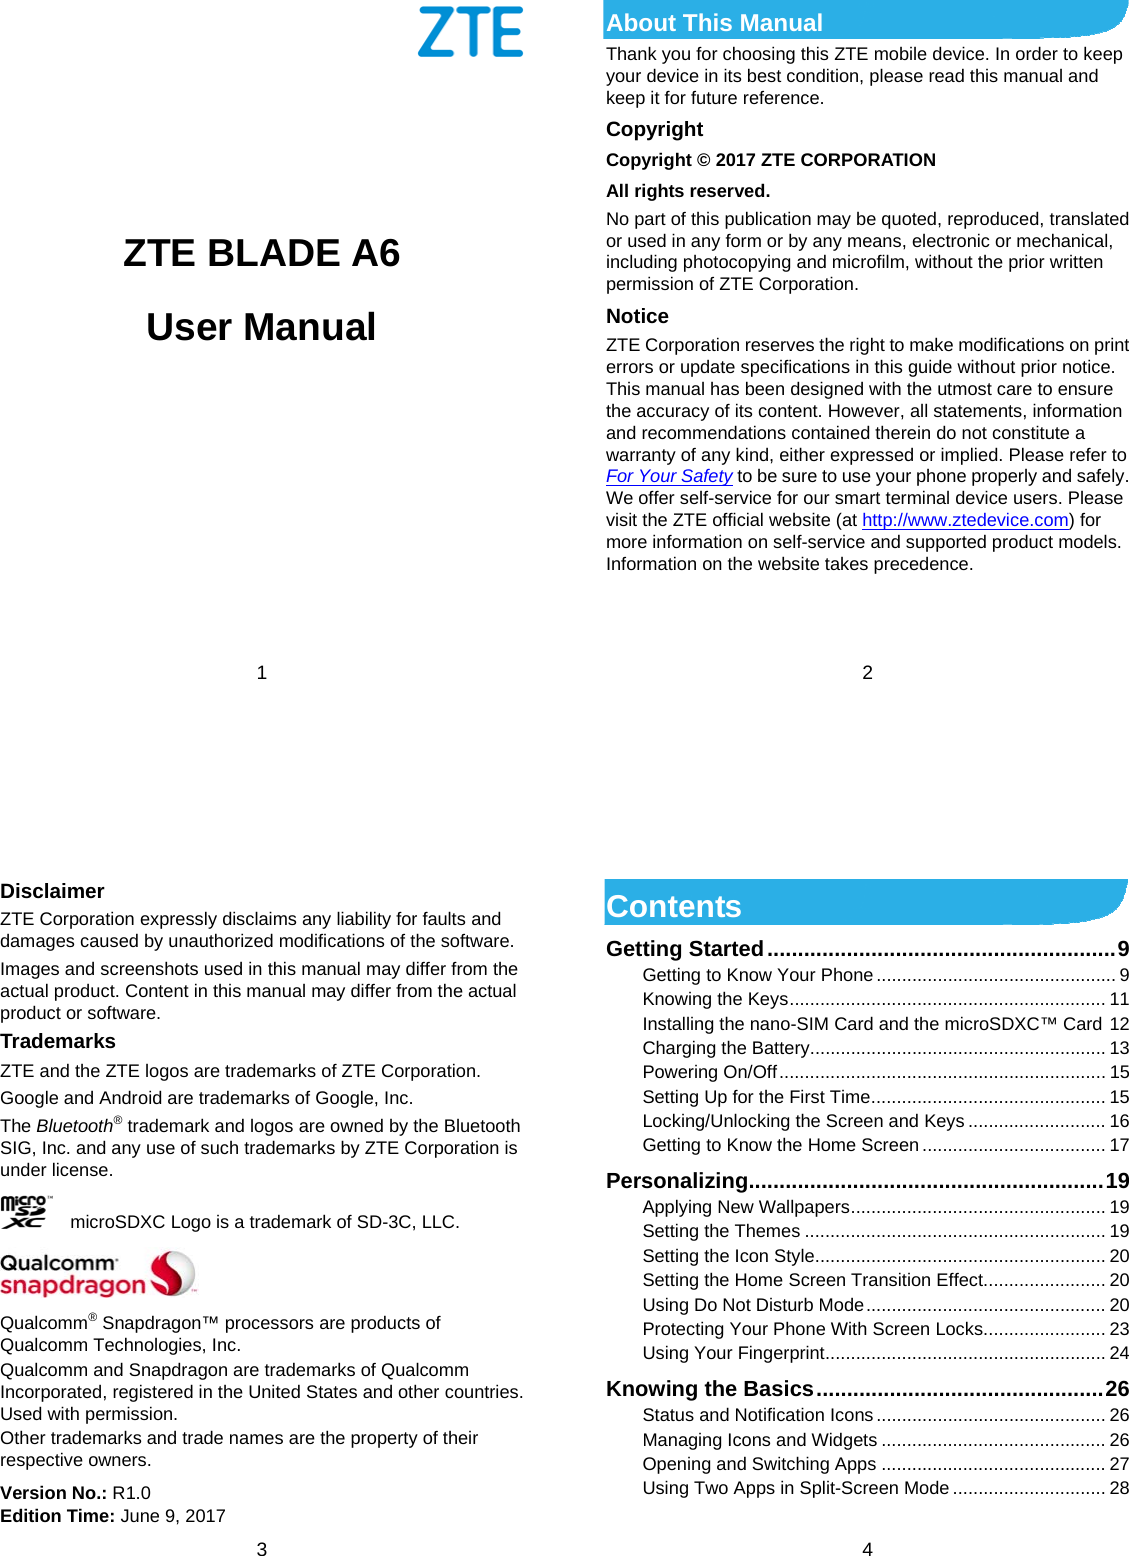  1            ZTE BLADE A6 User Manual     2 About This Manual Thank you for choosing this ZTE mobile device. In order to keep your device in its best condition, please read this manual and keep it for future reference. Copyright Copyright © 2017 ZTE CORPORATION All rights reserved. No part of this publication may be quoted, reproduced, translated or used in any form or by any means, electronic or mechanical, including photocopying and microfilm, without the prior written permission of ZTE Corporation. Notice ZTE Corporation reserves the right to make modifications on print errors or update specifications in this guide without prior notice. This manual has been designed with the utmost care to ensure the accuracy of its content. However, all statements, information and recommendations contained therein do not constitute a warranty of any kind, either expressed or implied. Please refer to For Your Safety to be sure to use your phone properly and safely. We offer self-service for our smart terminal device users. Please visit the ZTE official website (at http://www.ztedevice.com) for more information on self-service and supported product models. Information on the website takes precedence.    3 Disclaimer ZTE Corporation expressly disclaims any liability for faults and damages caused by unauthorized modifications of the software. Images and screenshots used in this manual may differ from the actual product. Content in this manual may differ from the actual product or software. Trademarks ZTE and the ZTE logos are trademarks of ZTE Corporation. Google and Android are trademarks of Google, Inc.   The Bluetooth® trademark and logos are owned by the Bluetooth SIG, Inc. and any use of such trademarks by ZTE Corporation is under license.       microSDXC Logo is a trademark of SD-3C, LLC.  Qualcomm® Snapdragon™ processors are products of Qualcomm Technologies, Inc.   Qualcomm and Snapdragon are trademarks of Qualcomm Incorporated, registered in the United States and other countries. Used with permission. Other trademarks and trade names are the property of their respective owners. Version No.: R1.0 Edition Time: June 9, 2017  4 Contents Getting Started ......................................................... 9 Getting to Know Your Phone ............................................... 9 Knowing the Keys .............................................................. 11 Installing the nano-SIM Card and the microSDXC™ Card 12 Charging the Battery.......................................................... 13 Powering On/Off ................................................................ 15 Setting Up for the First Time .............................................. 15 Locking/Unlocking the Screen and Keys ........................... 16 Getting to Know the Home Screen .................................... 17 Personalizing .......................................................... 19 Applying New Wallpapers .................................................. 19 Setting the Themes ........................................................... 19 Setting the Icon Style ......................................................... 20 Setting the Home Screen Transition Effect ........................ 20 Using Do Not Disturb Mode ............................................... 20 Protecting Your Phone With Screen Locks ........................ 23 Using Your Fingerprint ....................................................... 24 Knowing the Basics ............................................... 26 Status and Notification Icons ............................................. 26 Managing Icons and Widgets ............................................ 26 Opening and Switching Apps ............................................ 27 Using Two Apps in Split-Screen Mode .............................. 28 